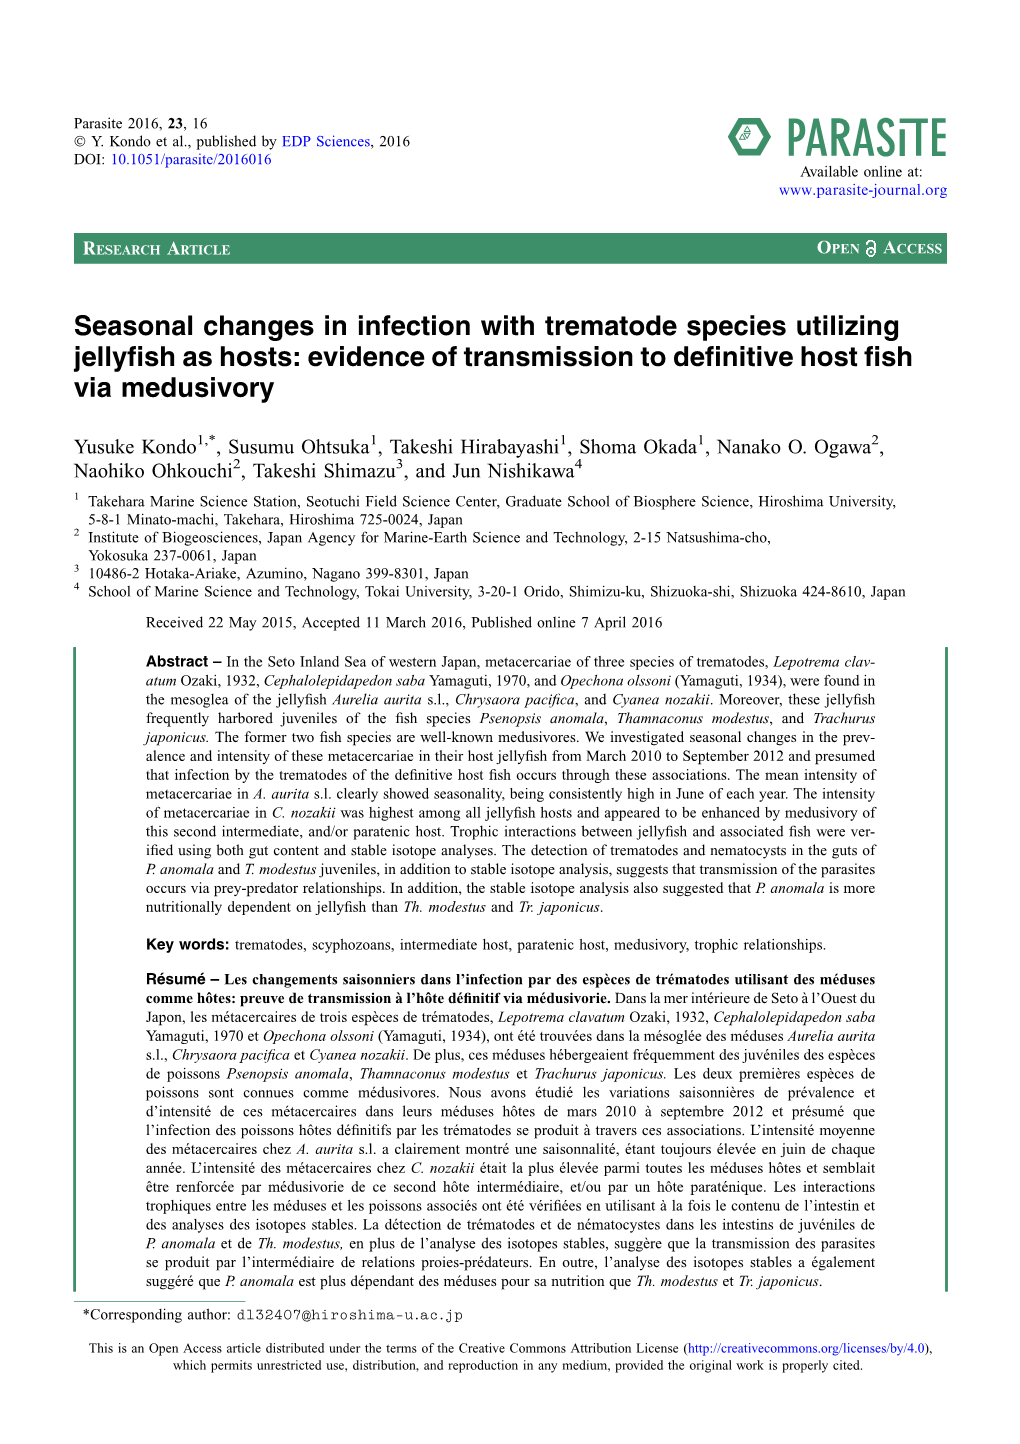 Seasonal Changes in Infection with Trematode Species Utilizing Jellyfish As Hosts: Evidence of Transmission to Definitive Host Fish Via Medusivory